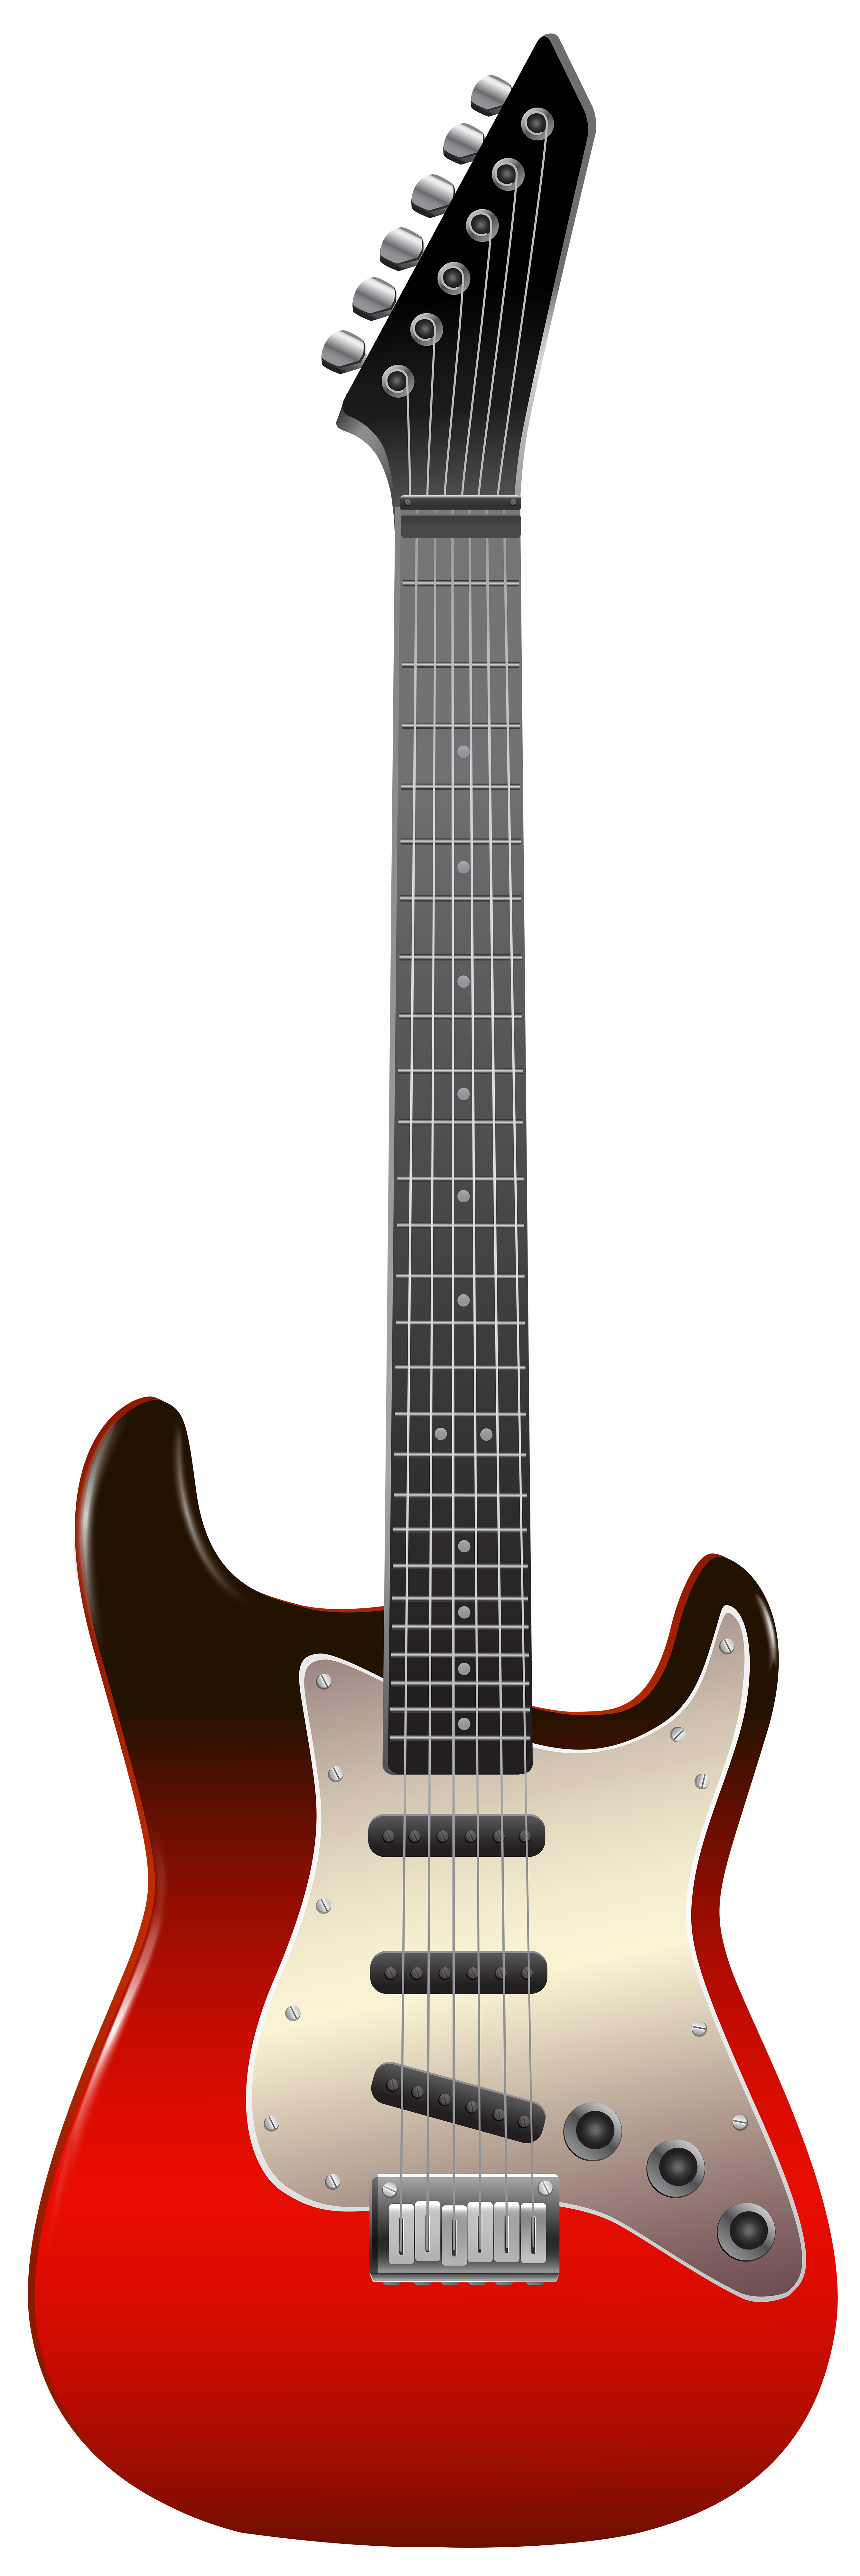 Guitar Electric Bass Free Transparent Image HQ Clipart